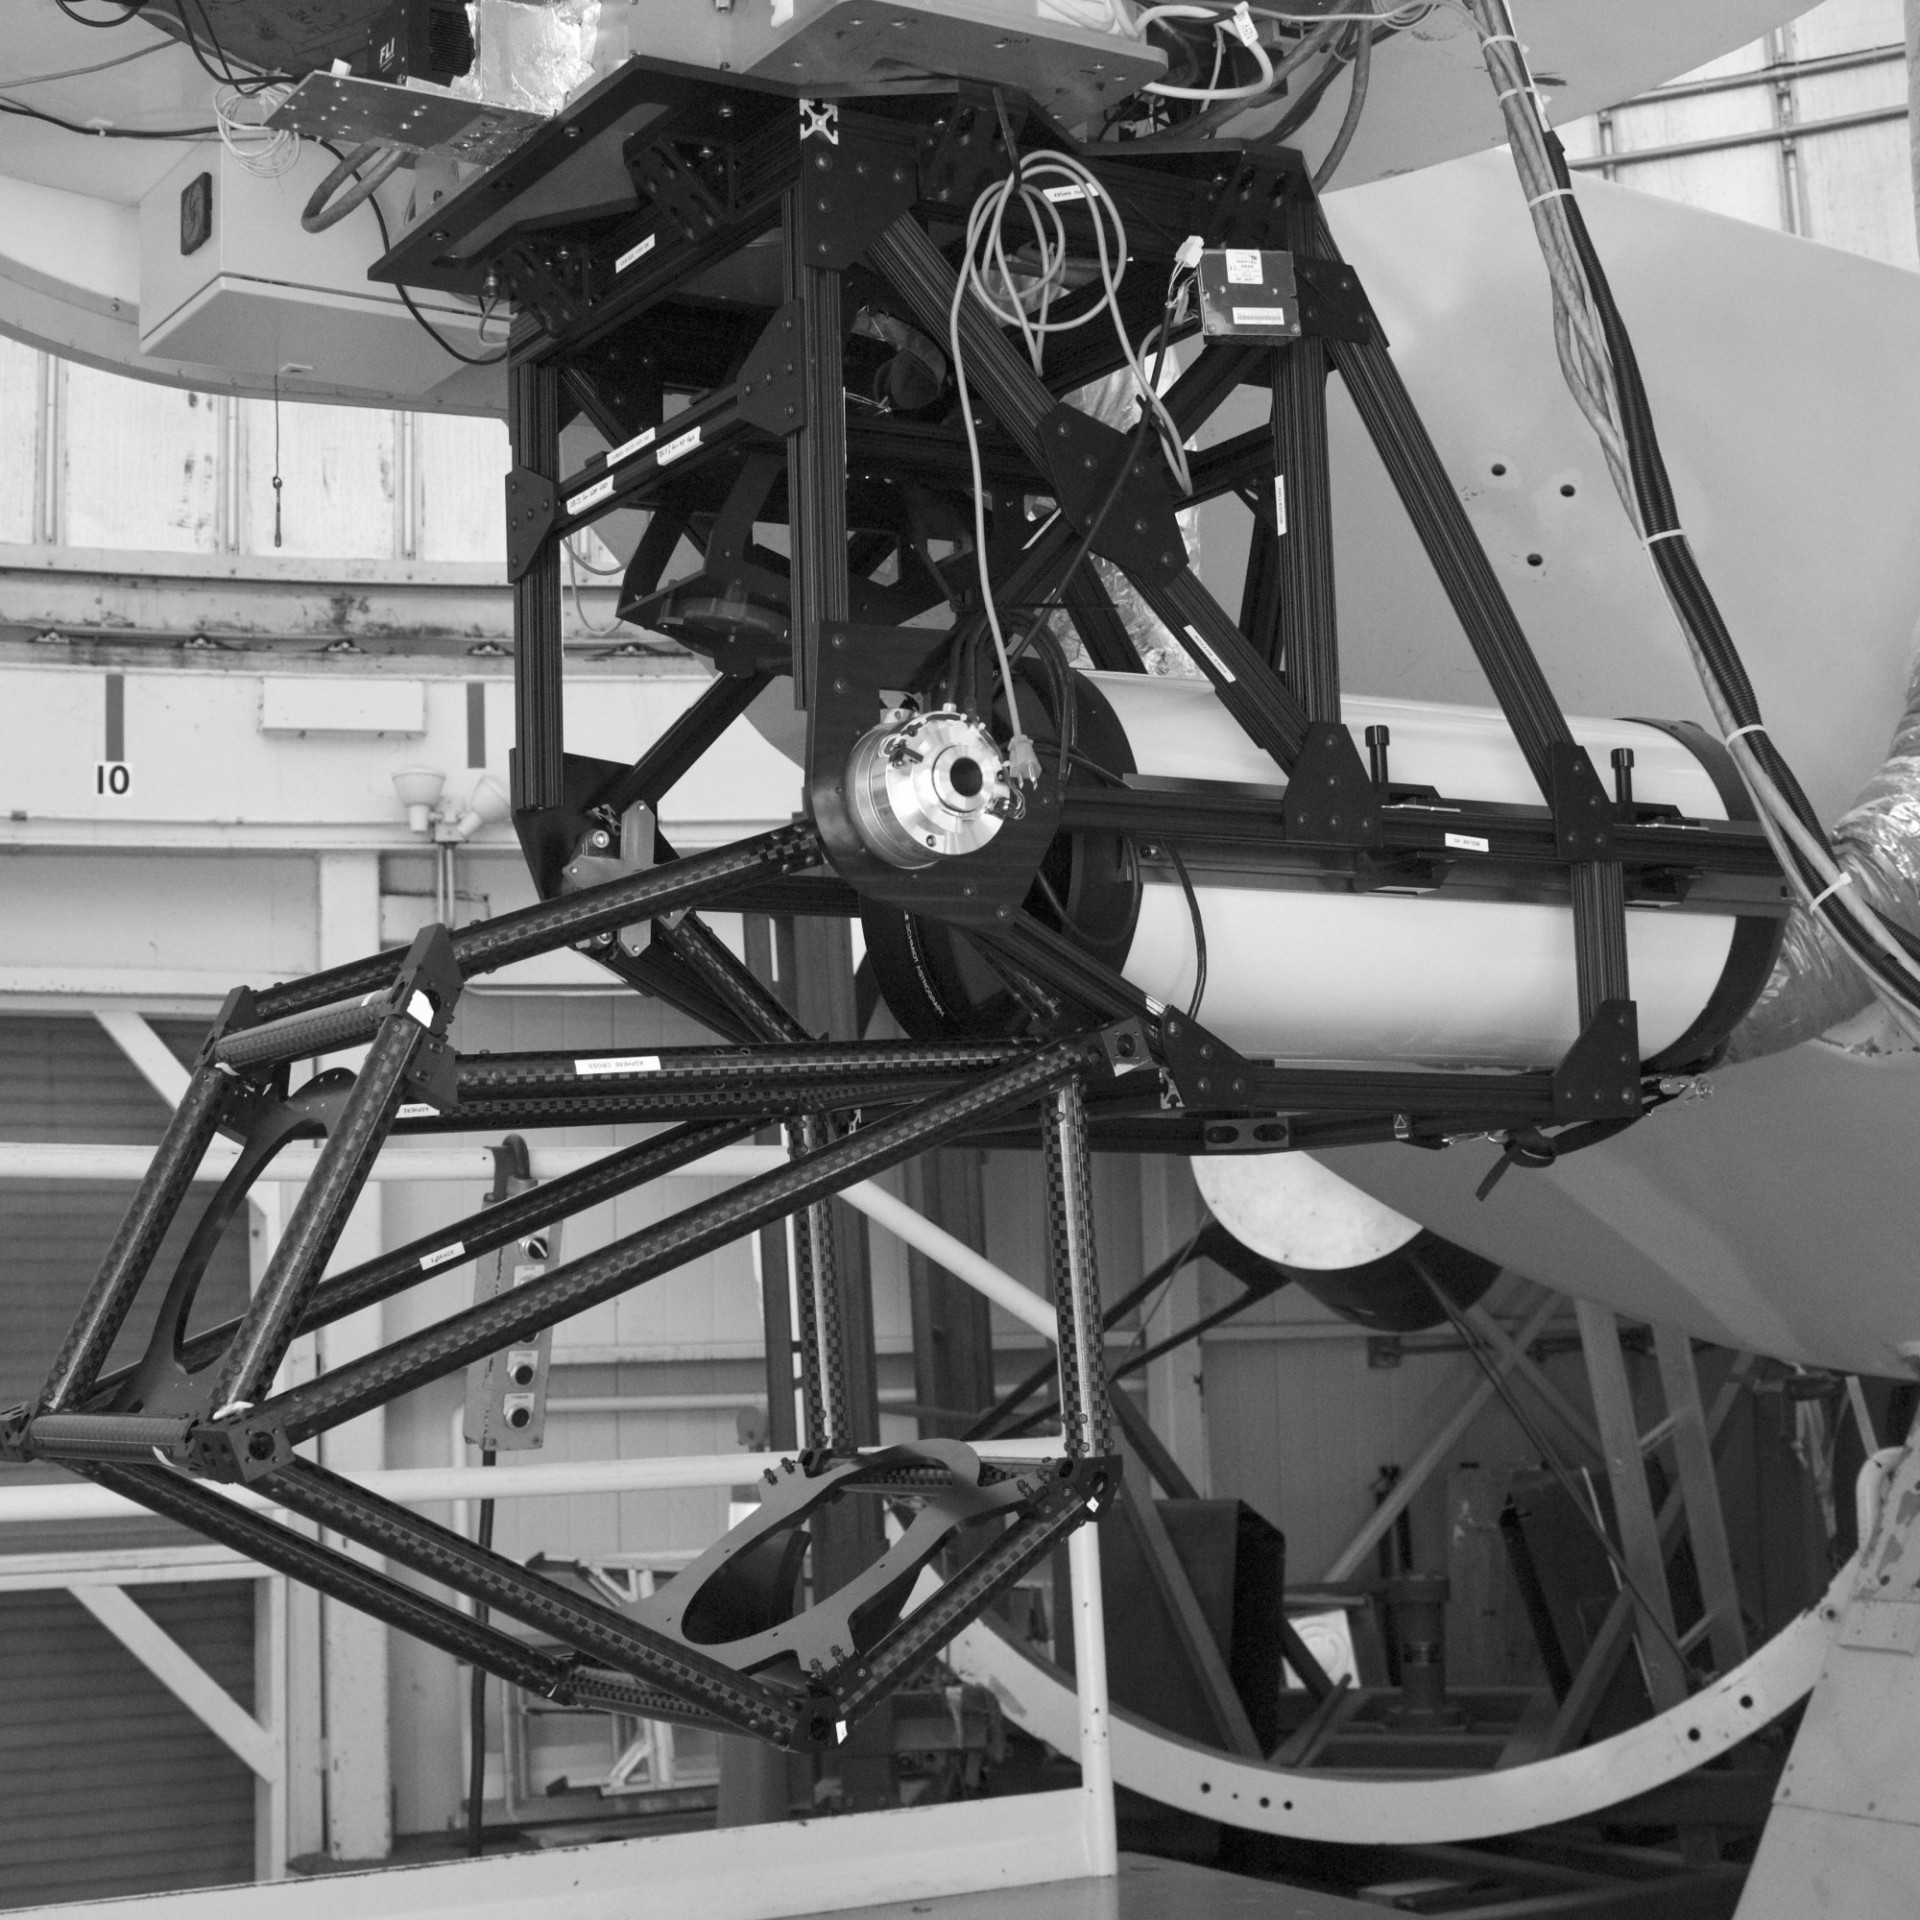 CHaS mounted at the MDM Observatory during Engineering Run.